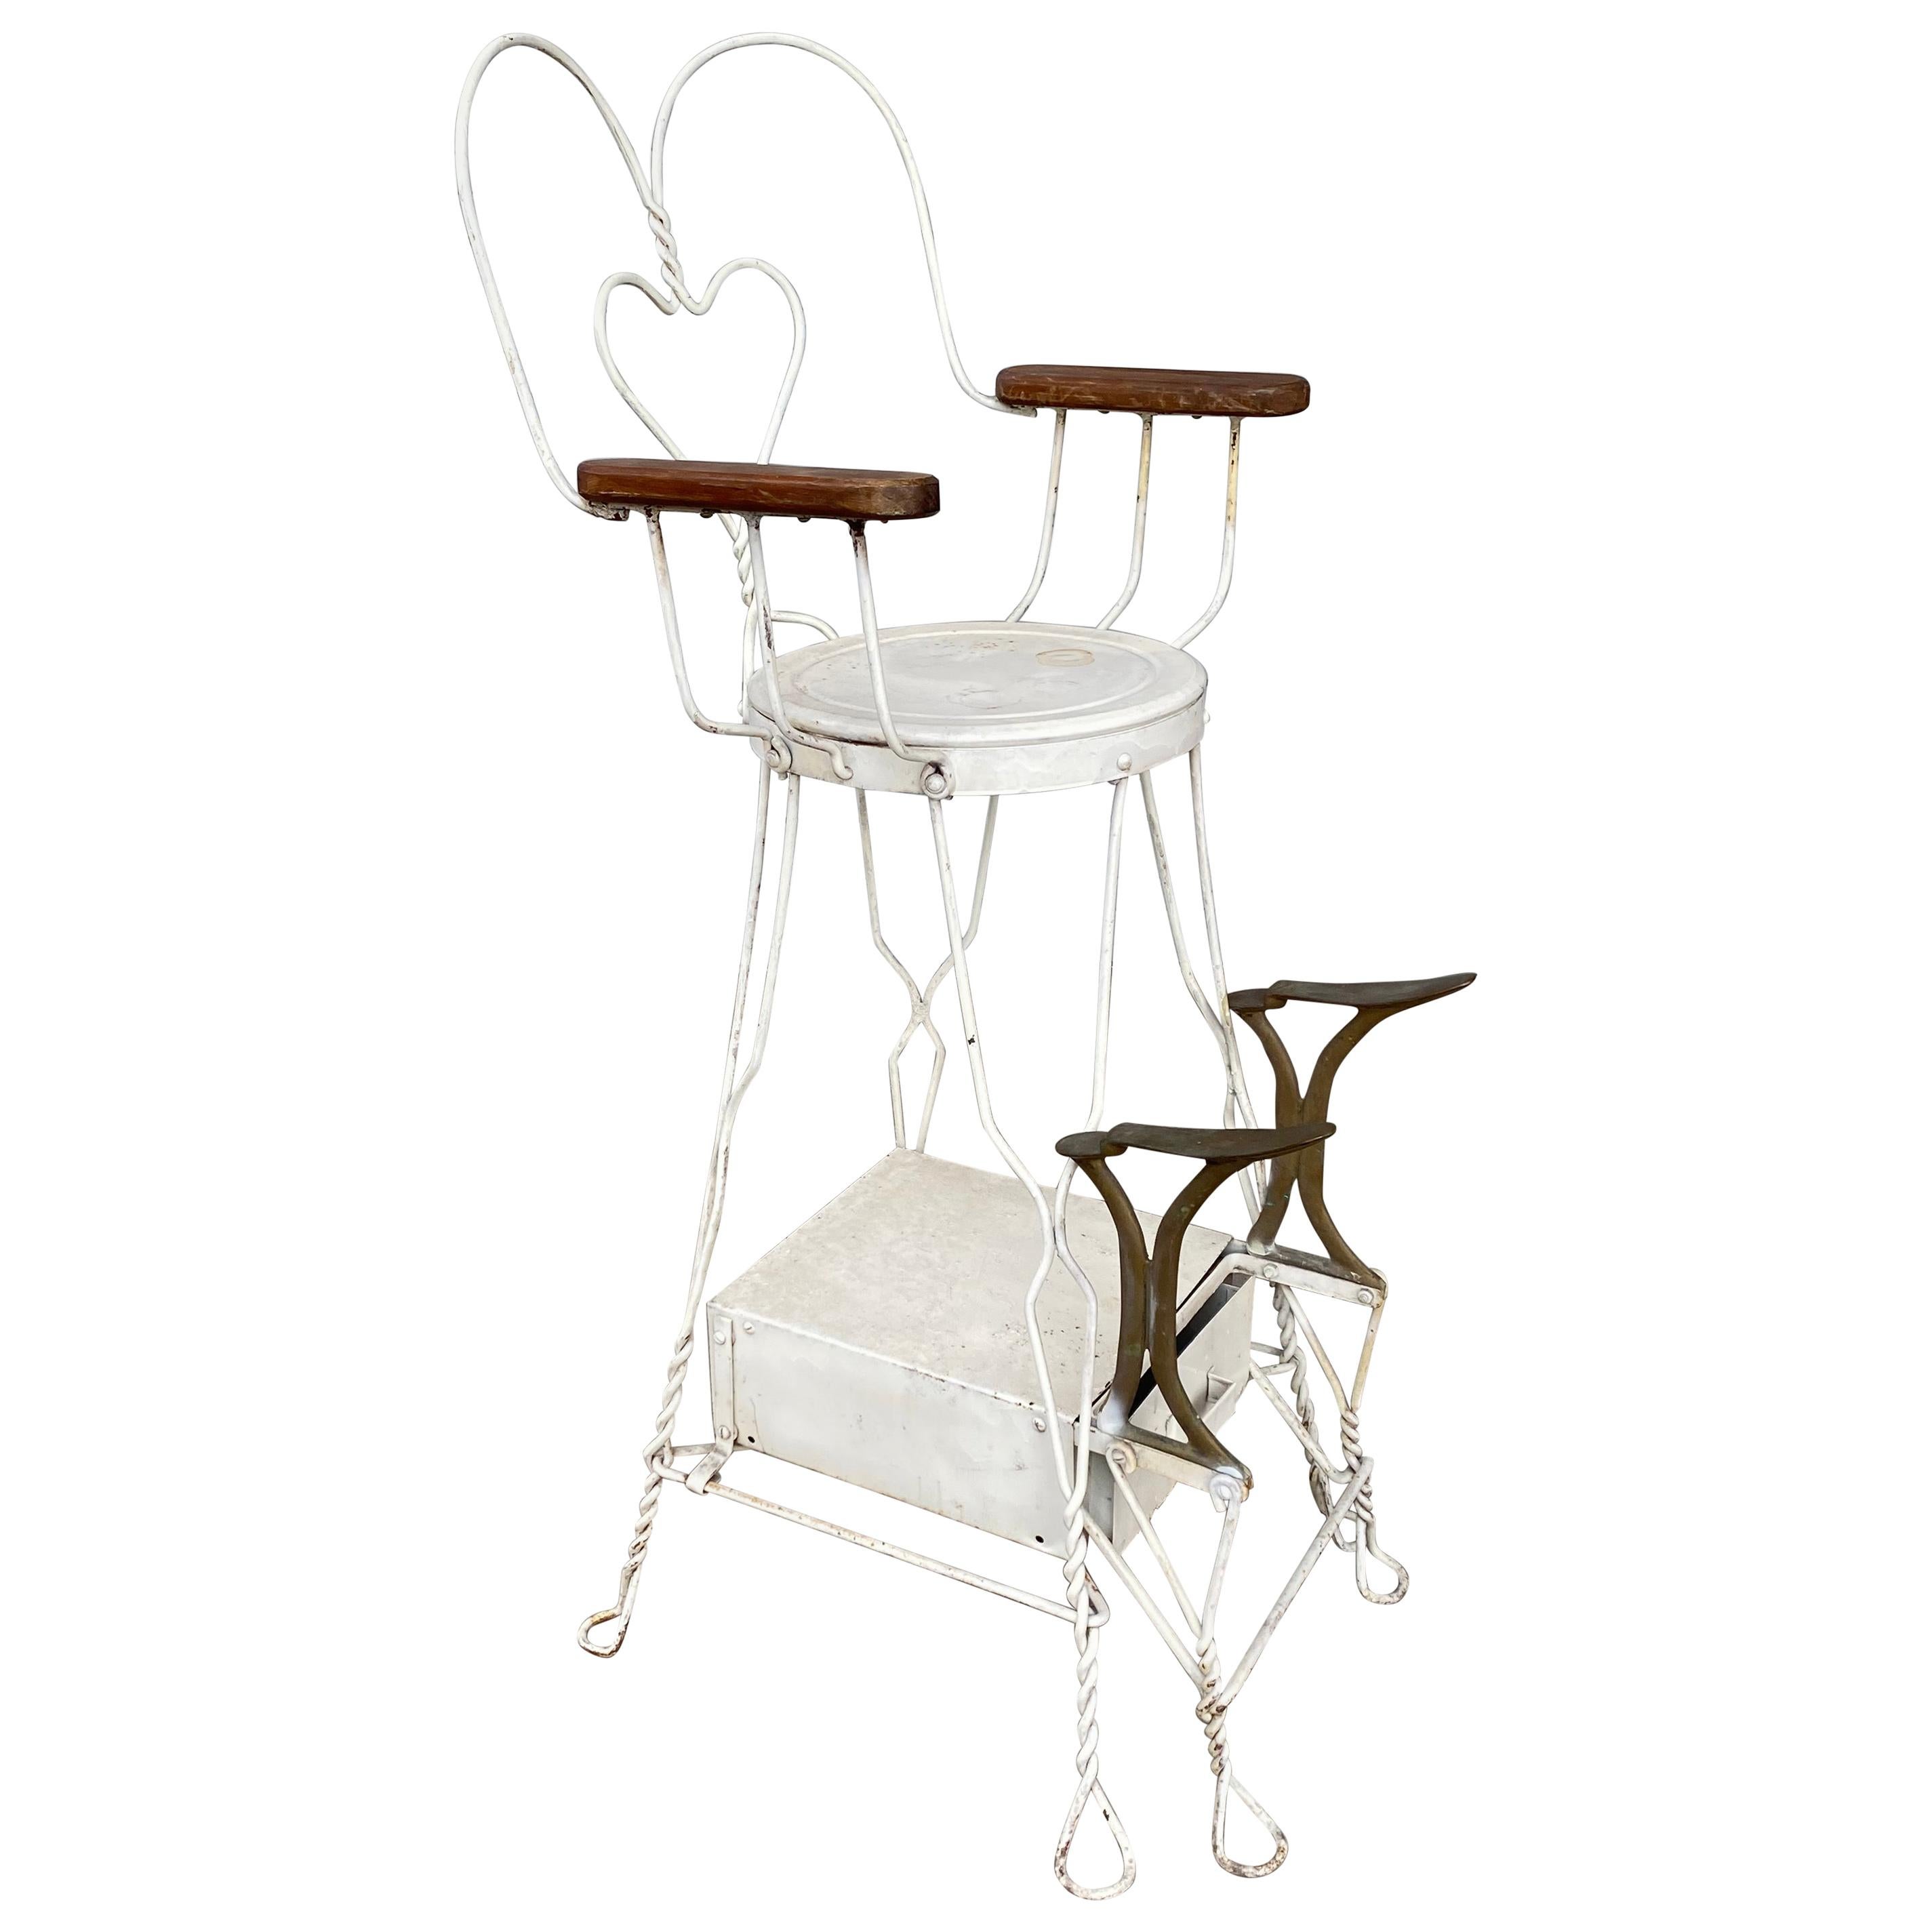 Early Ice Cream Parlour Style Wire Shoeshine Chair by Royal Products, Chicago